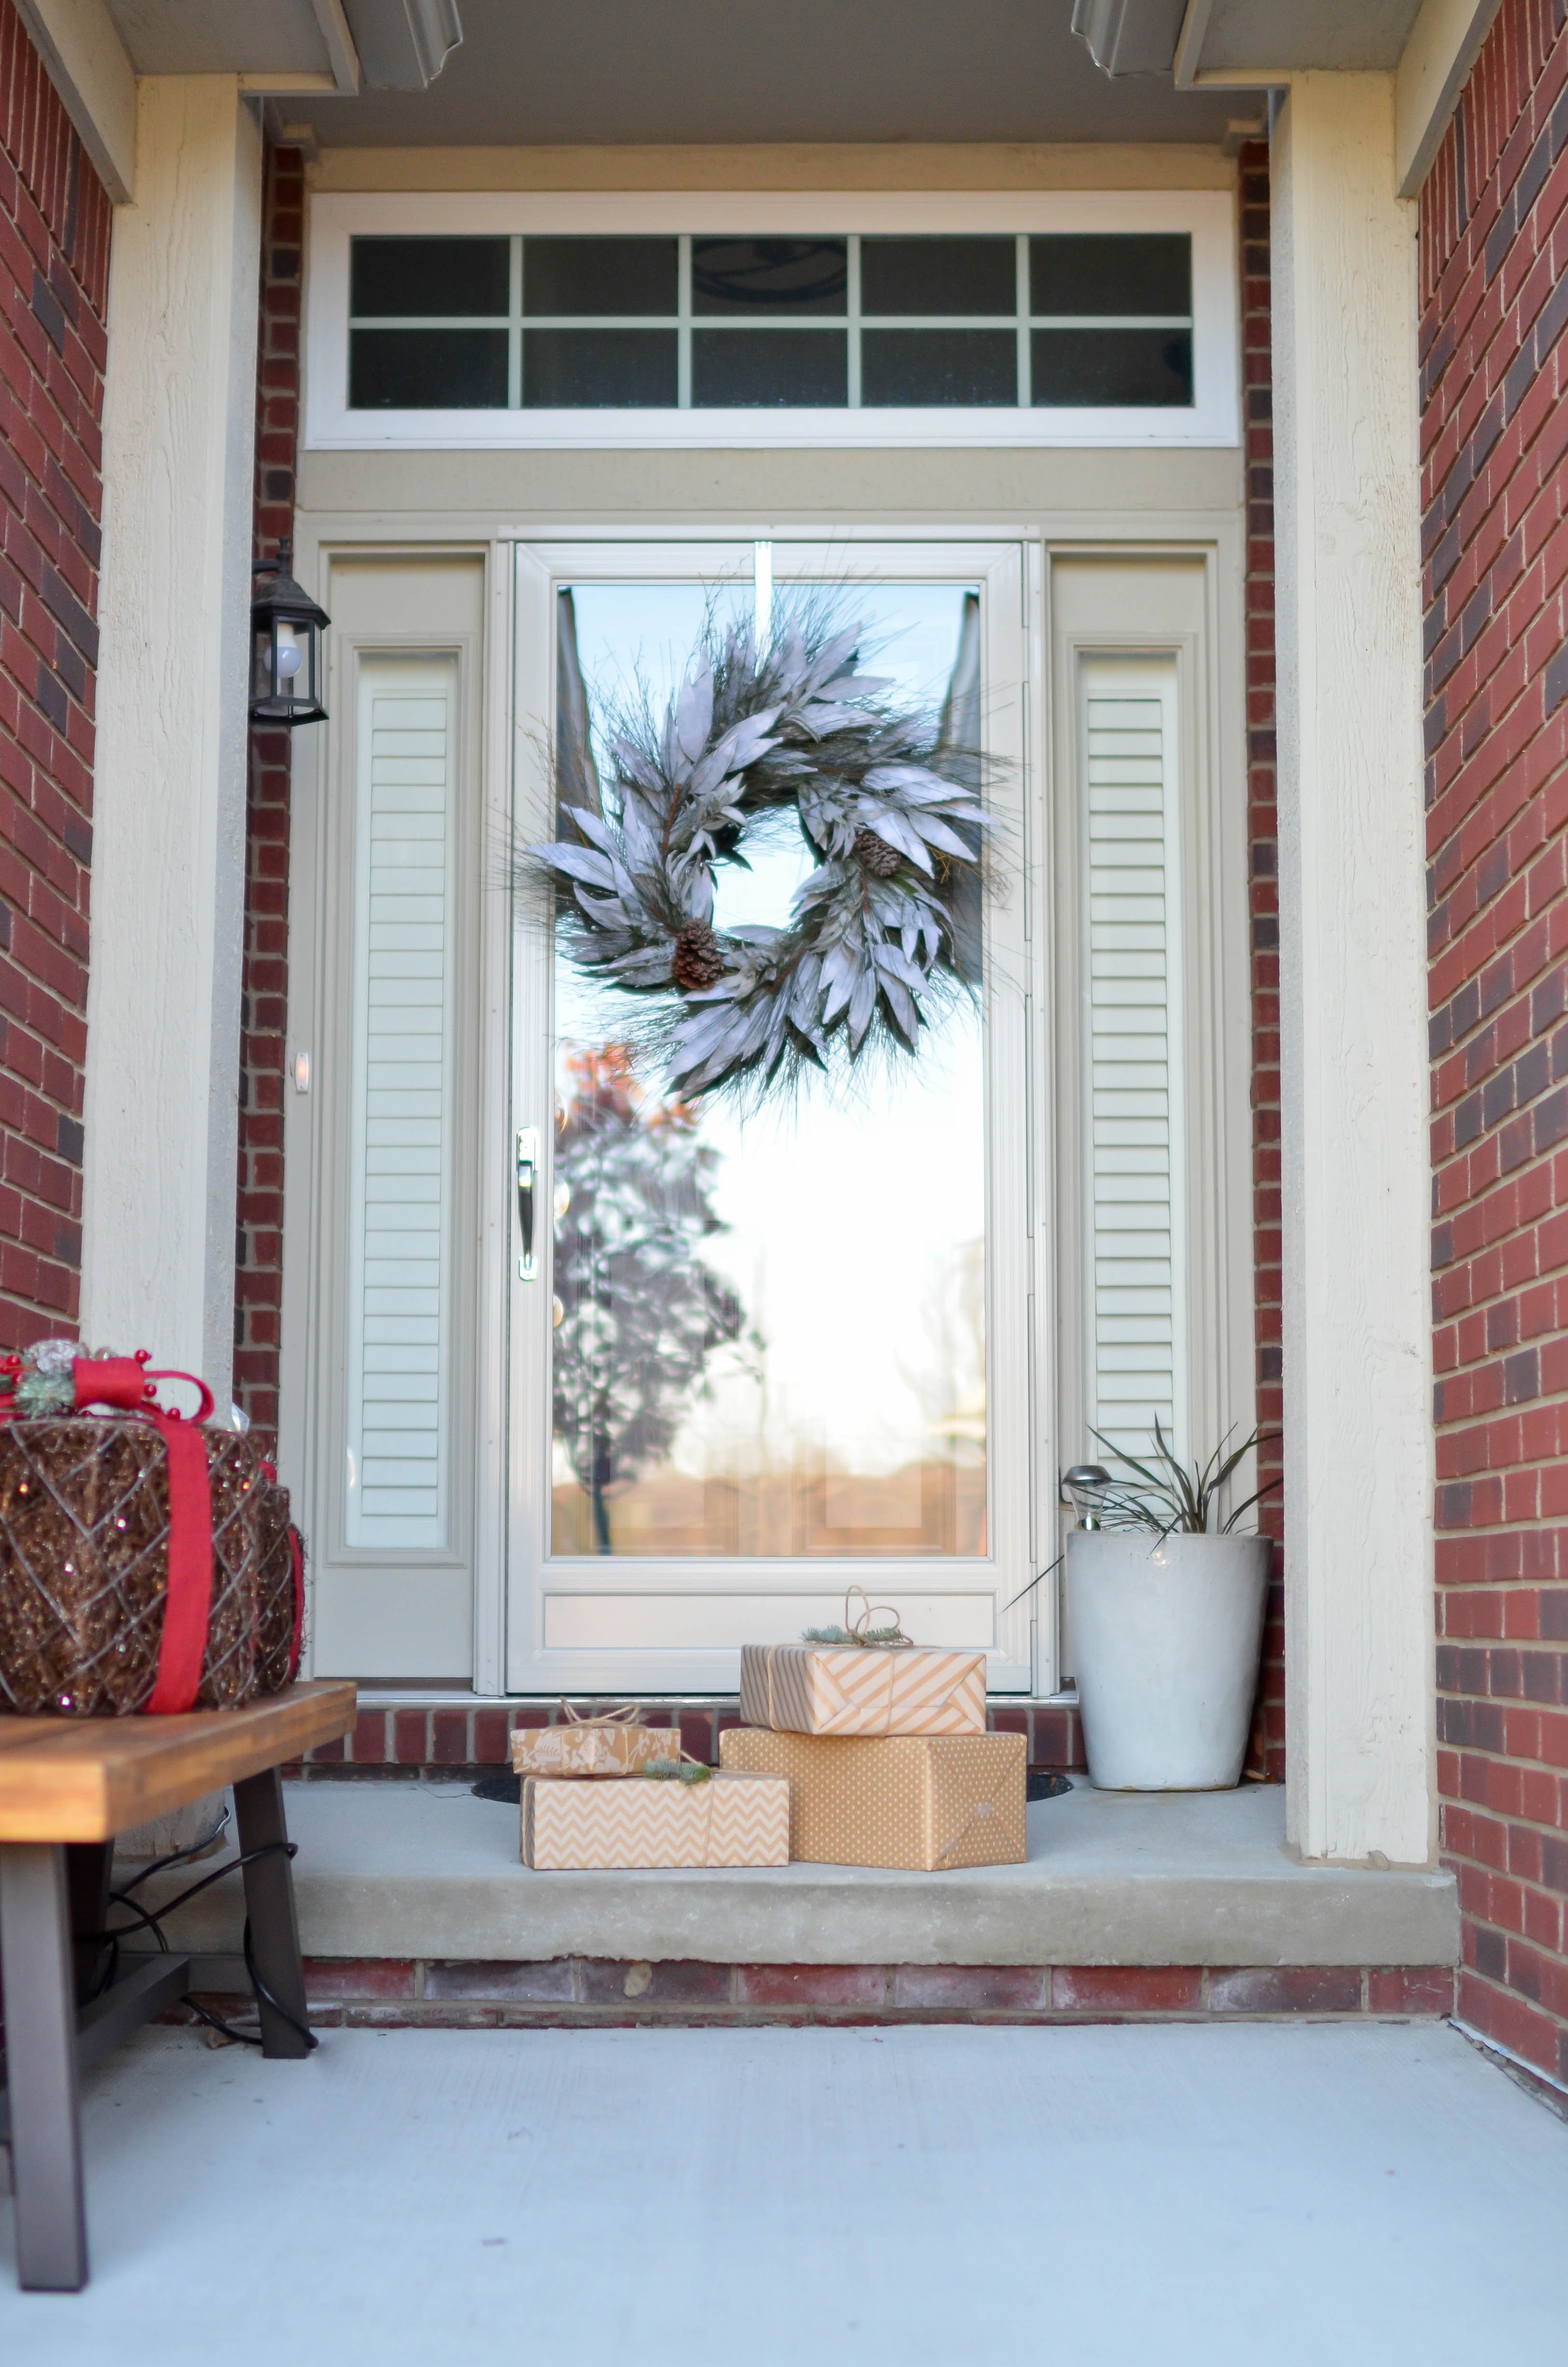 Four brown gift boxes near a glass paneled door with wreath. | Source: Pexels